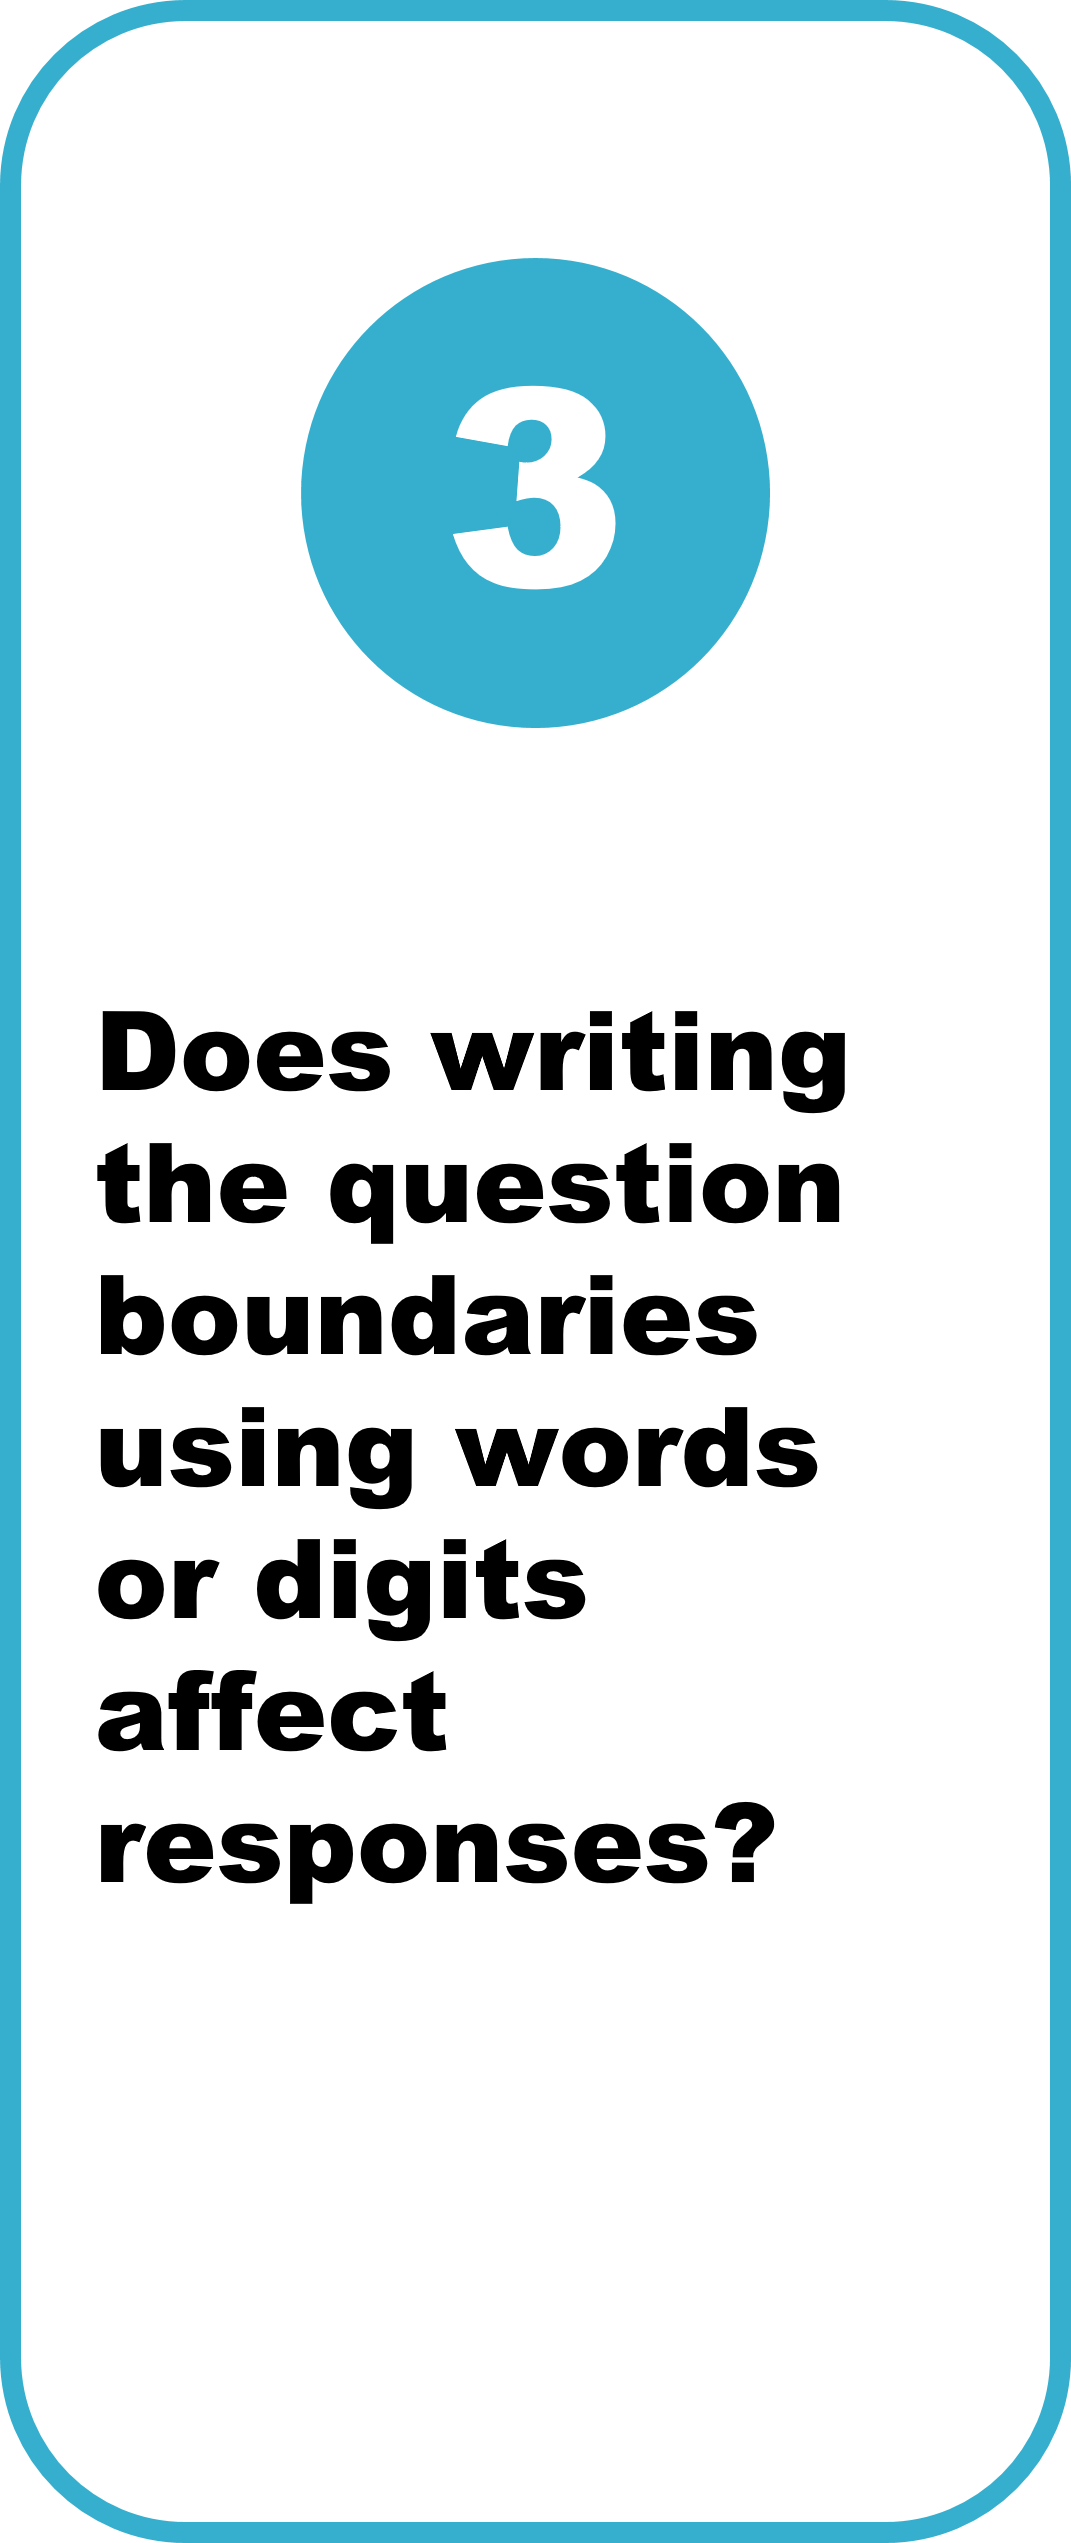 3. Does writing the question boundaries using words or digits affect responses? No   How the question was presented did not significantly affect the size or format of responses given. The majority of participants entered their responses using numerical digits, rather than words, regardless of condition.